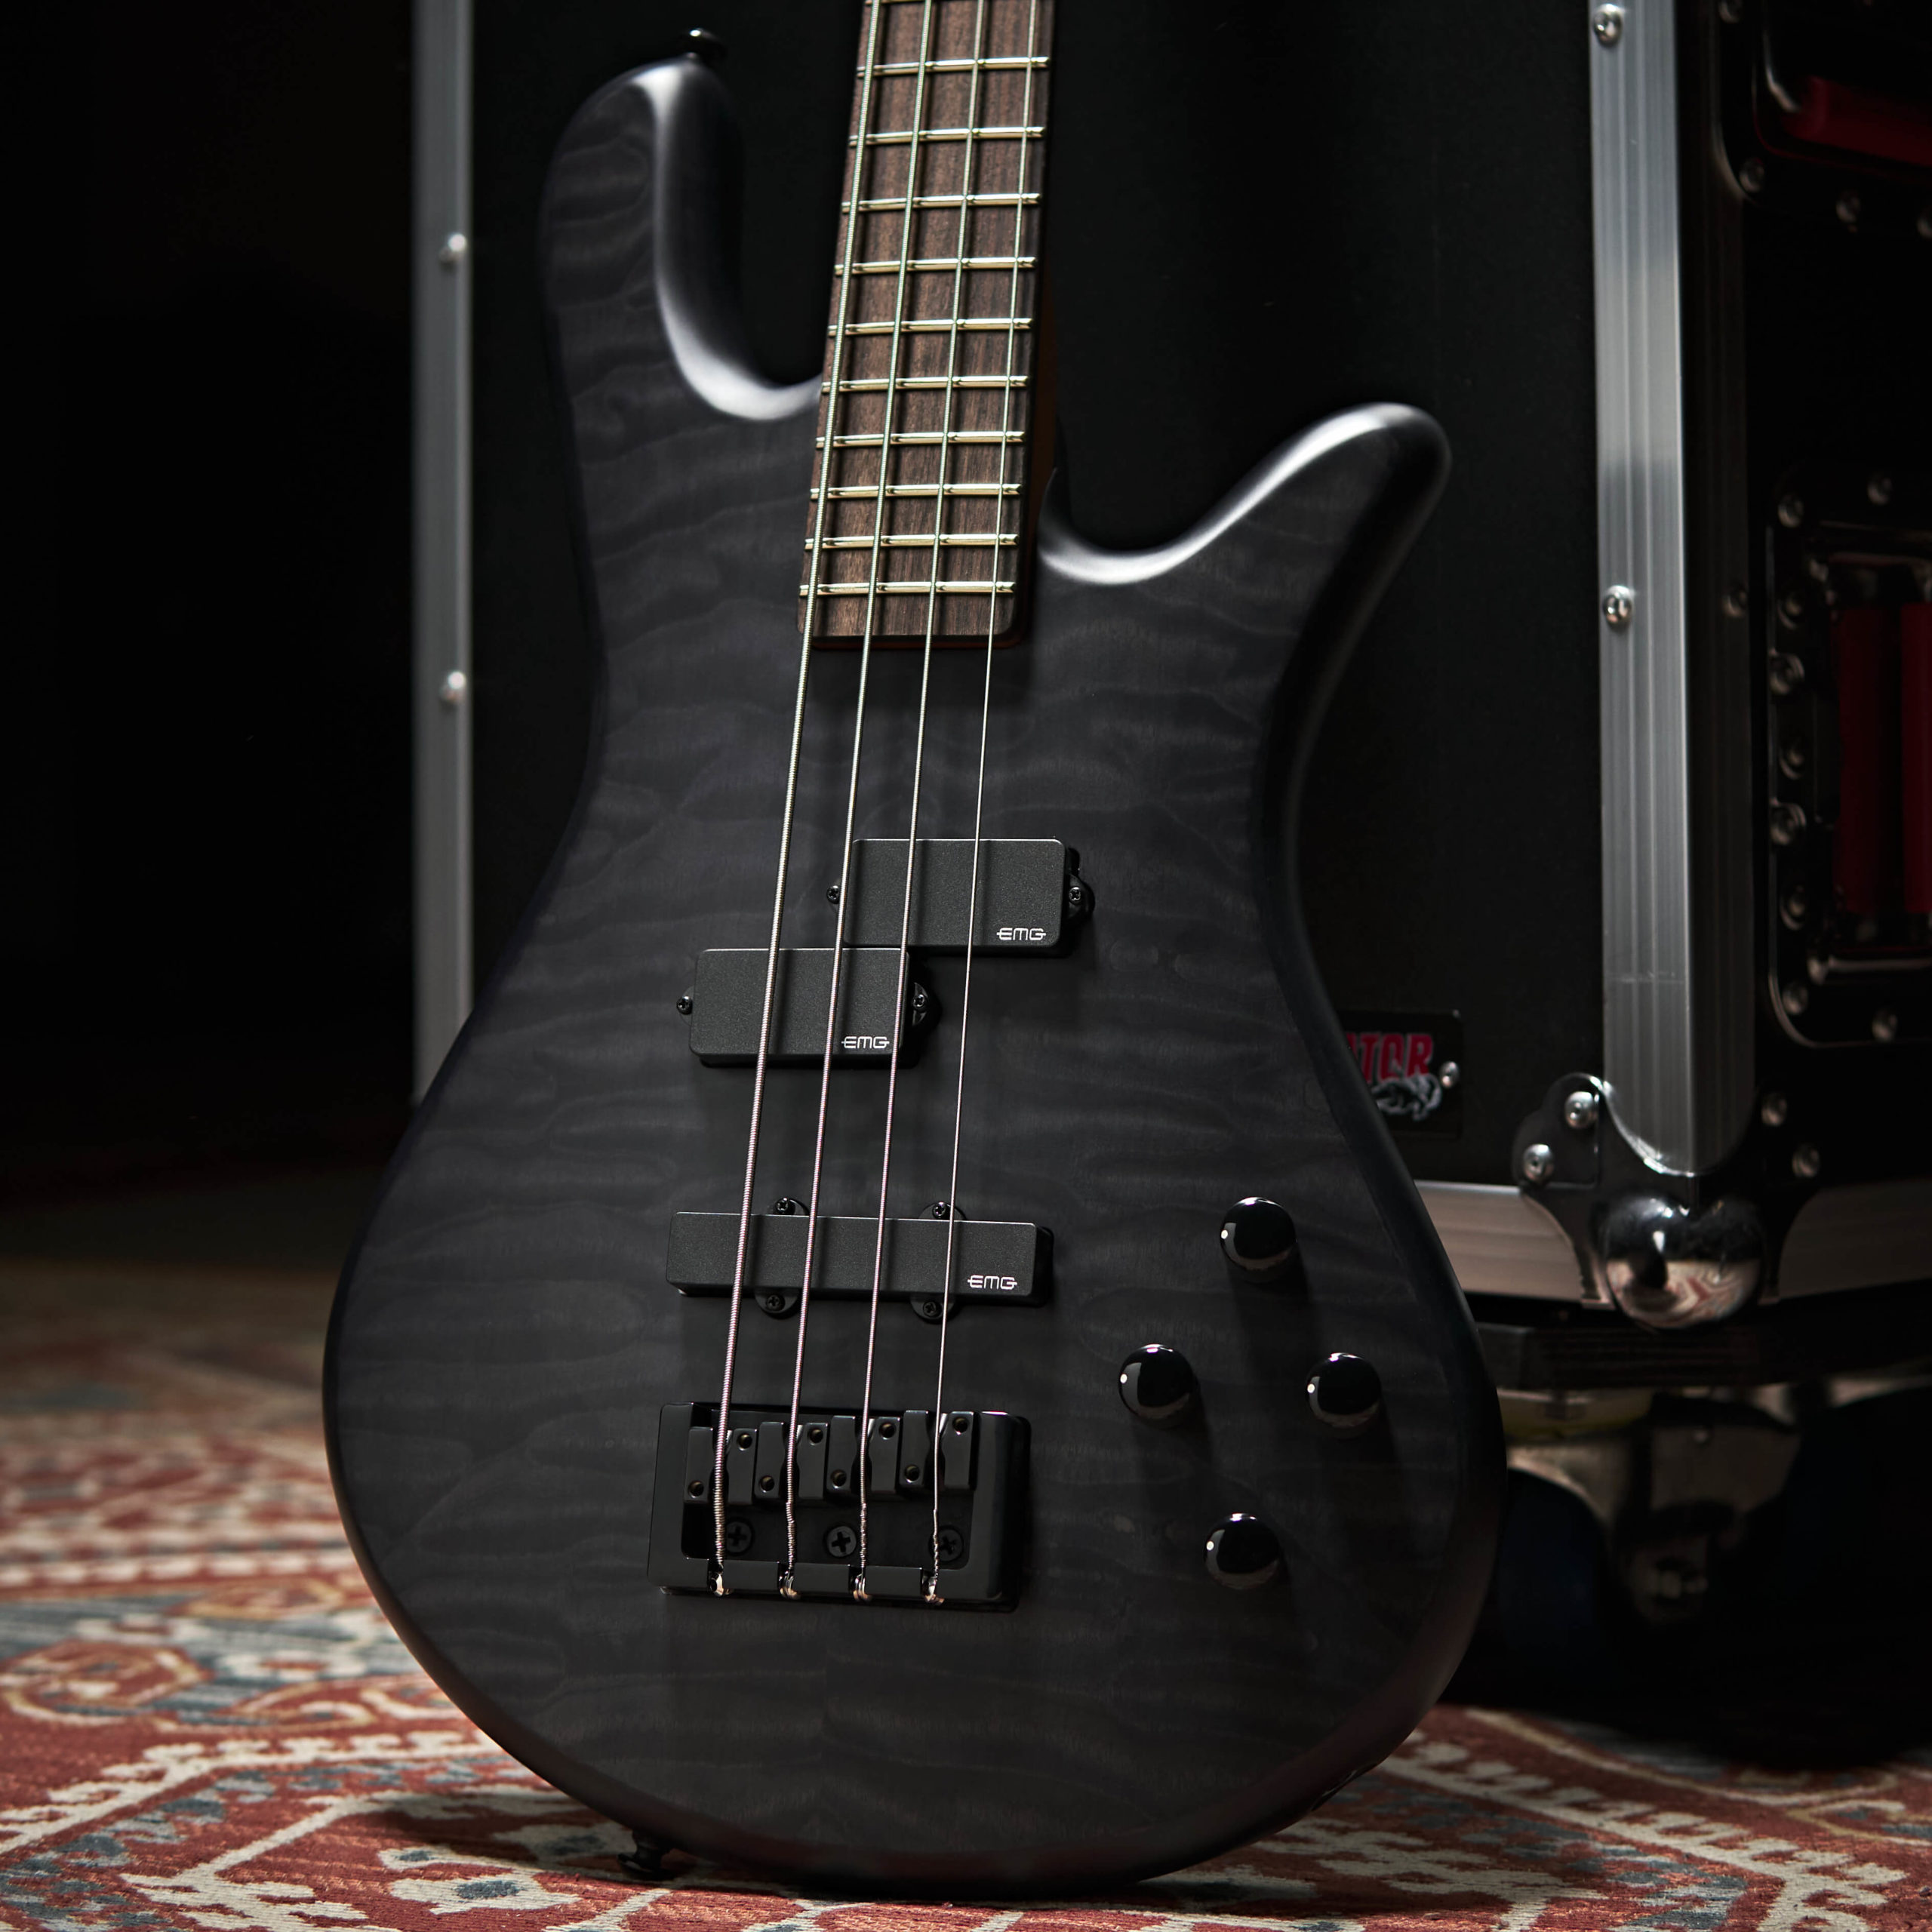 Spector Ns Pulse Ii 4c Active Emg Eb - Black Stain Matte - Solid body electric bass - Variation 3